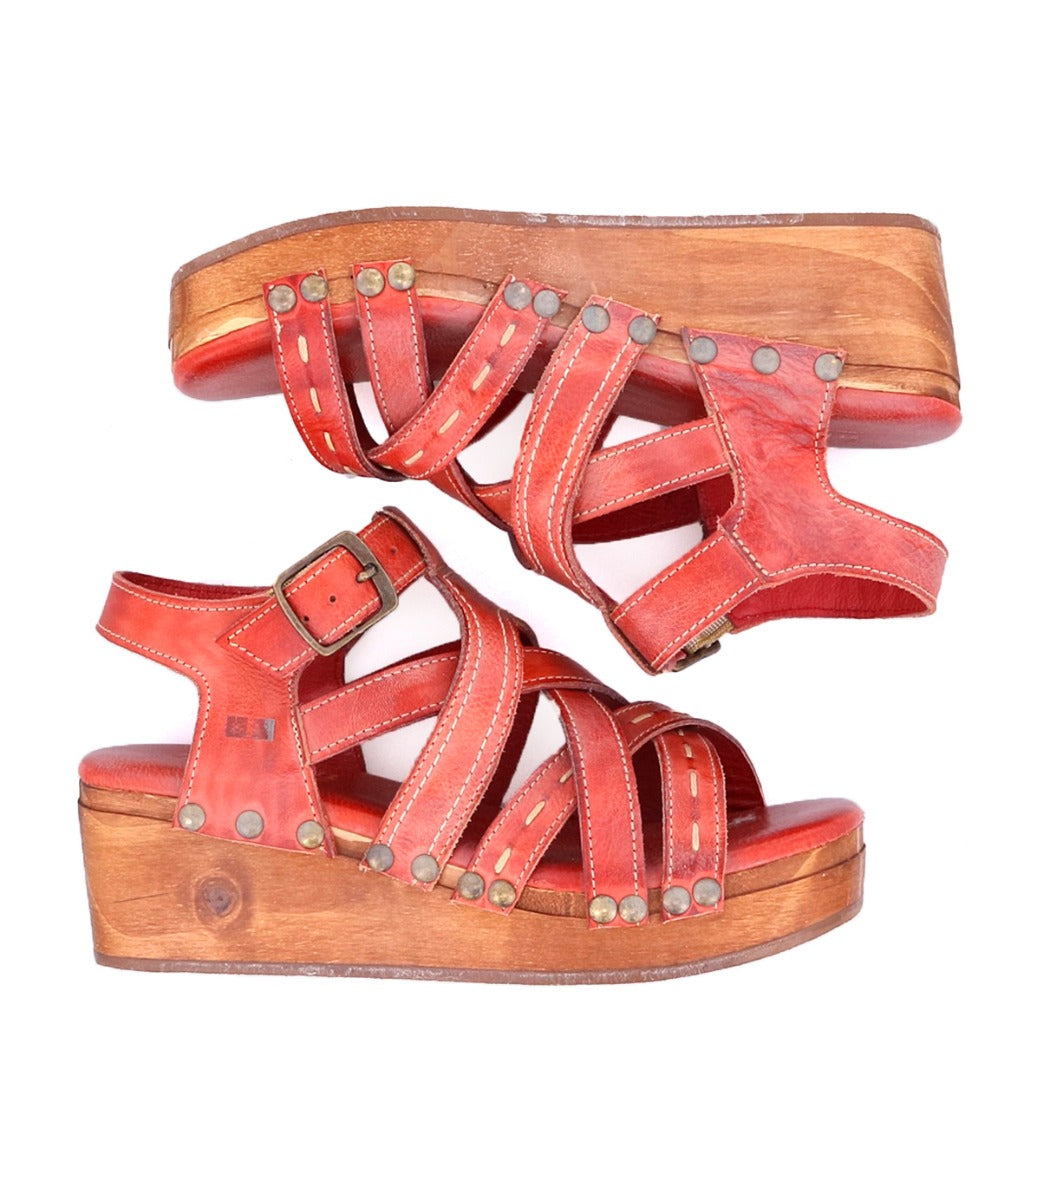 A pair of Shirley red sandals with wooden soles from Bed Stu.